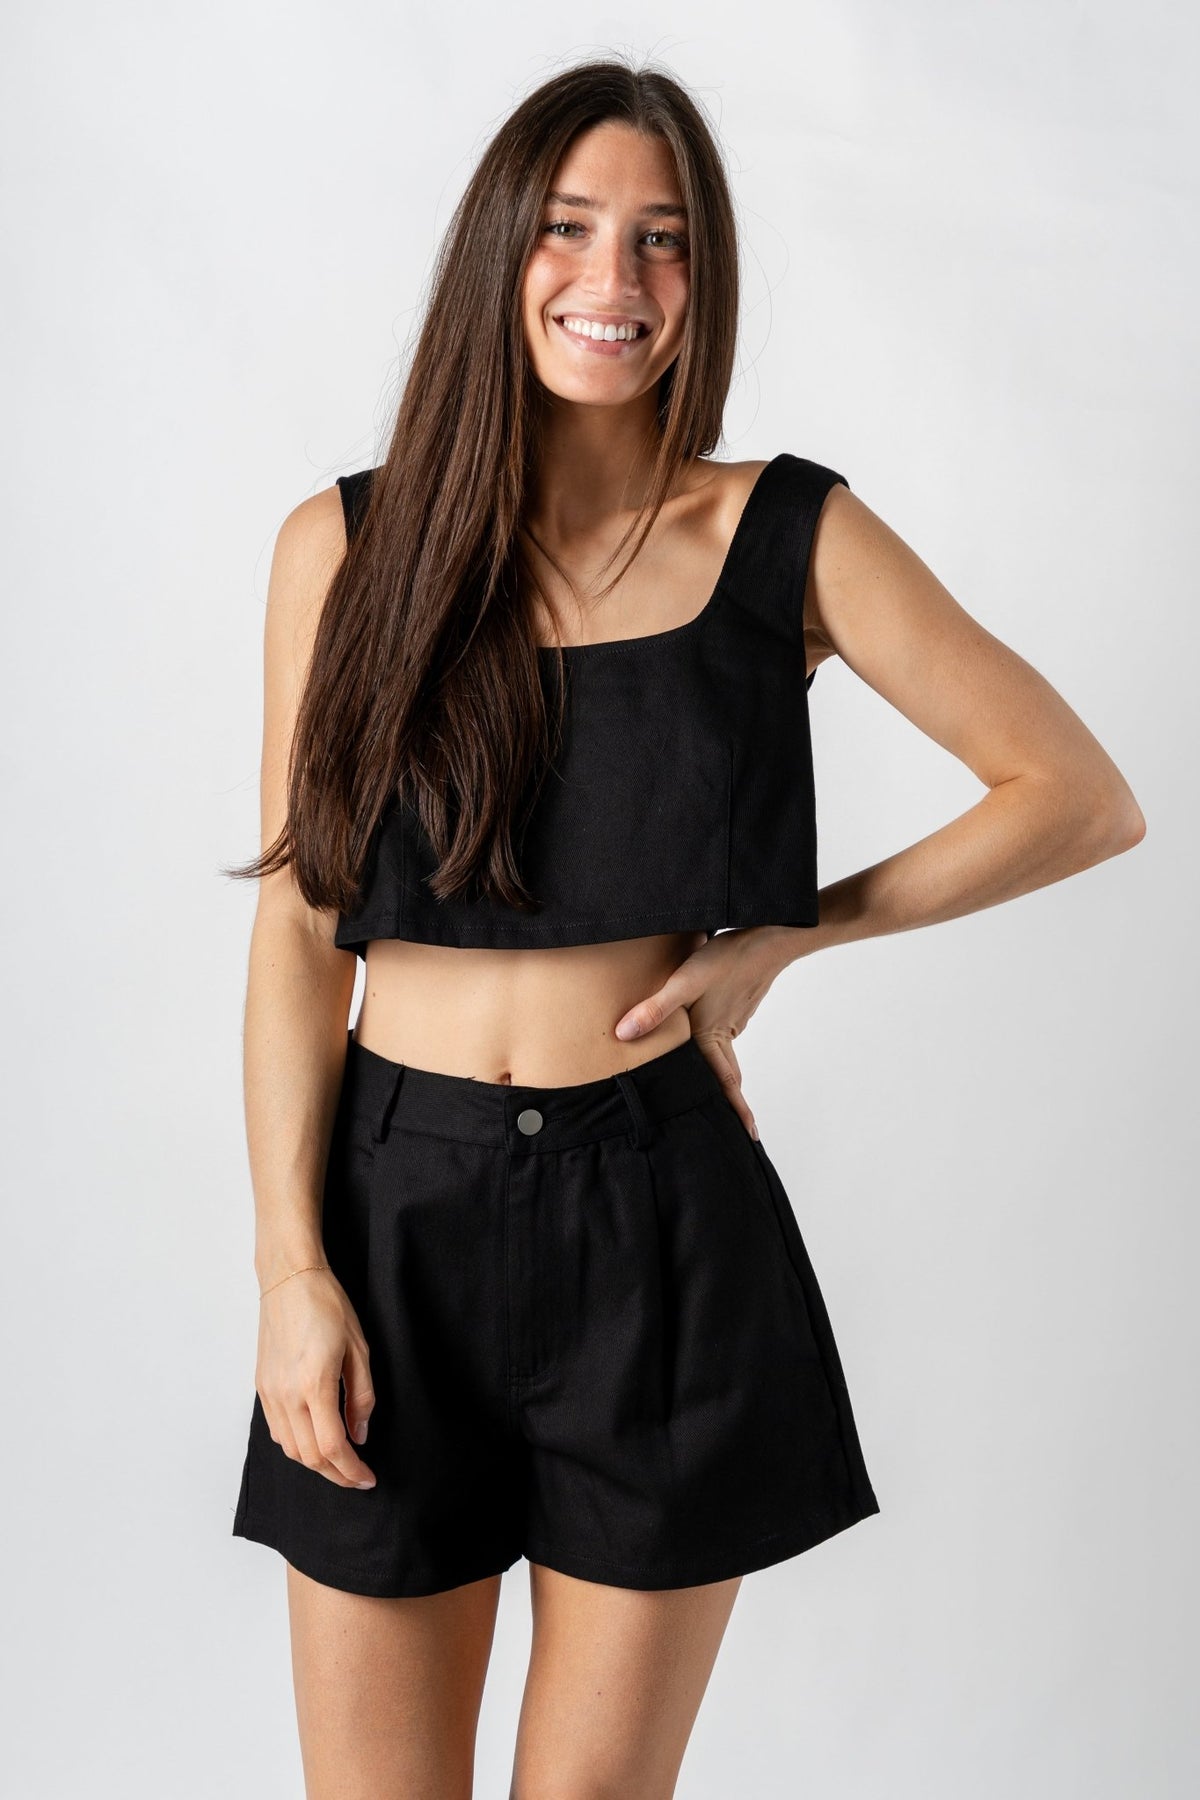 Tie back crop tank top black - Cute crop top - Trendy Tank Tops at Lush Fashion Lounge Boutique in Oklahoma City